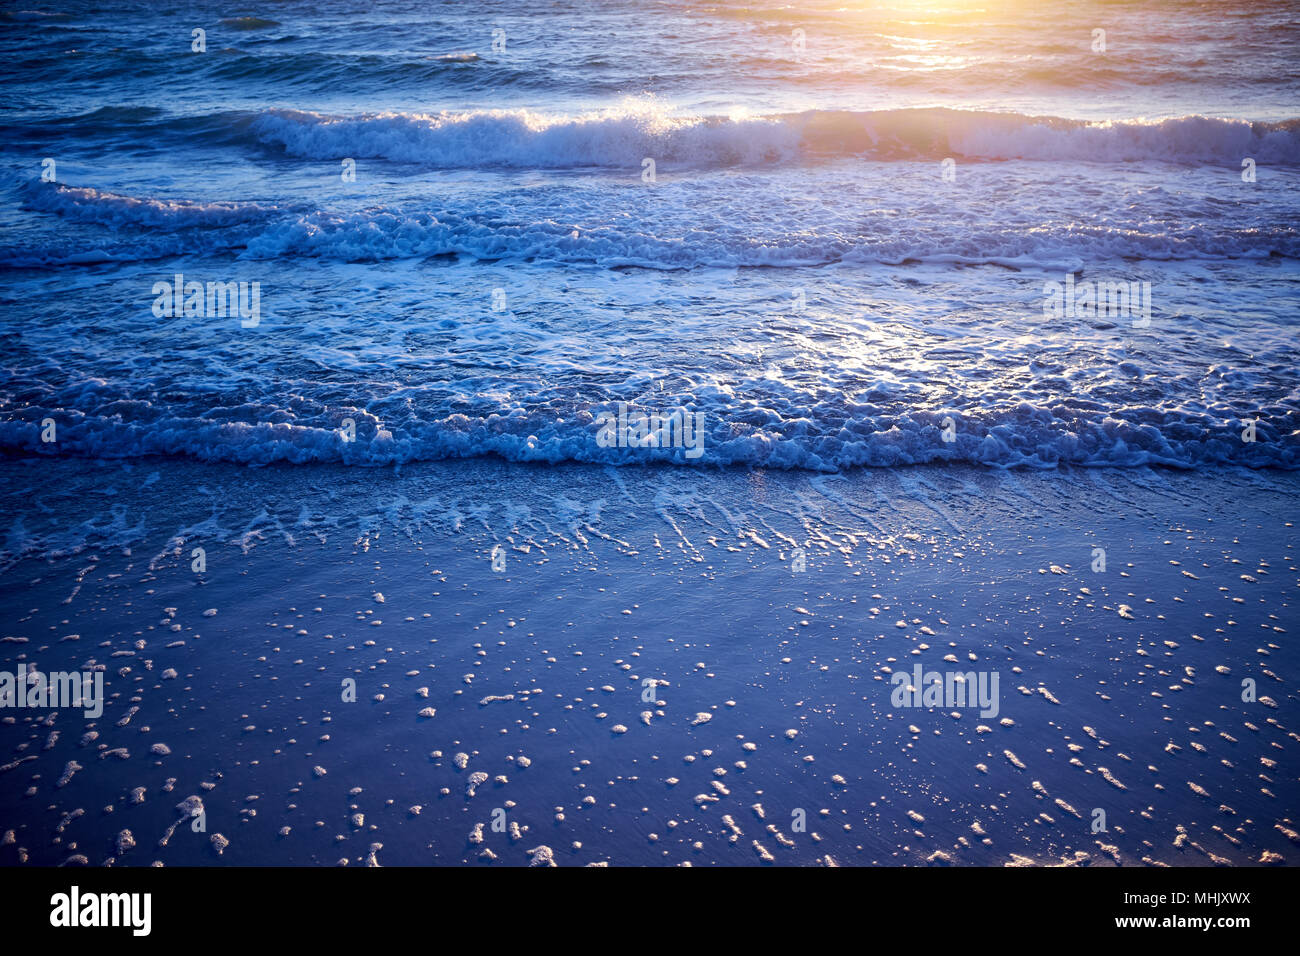 Golden glow of sunset over gently lapping waves on a beach on Anna Maria Island, Florida, USA in a low angle view with reflection Stock Photo